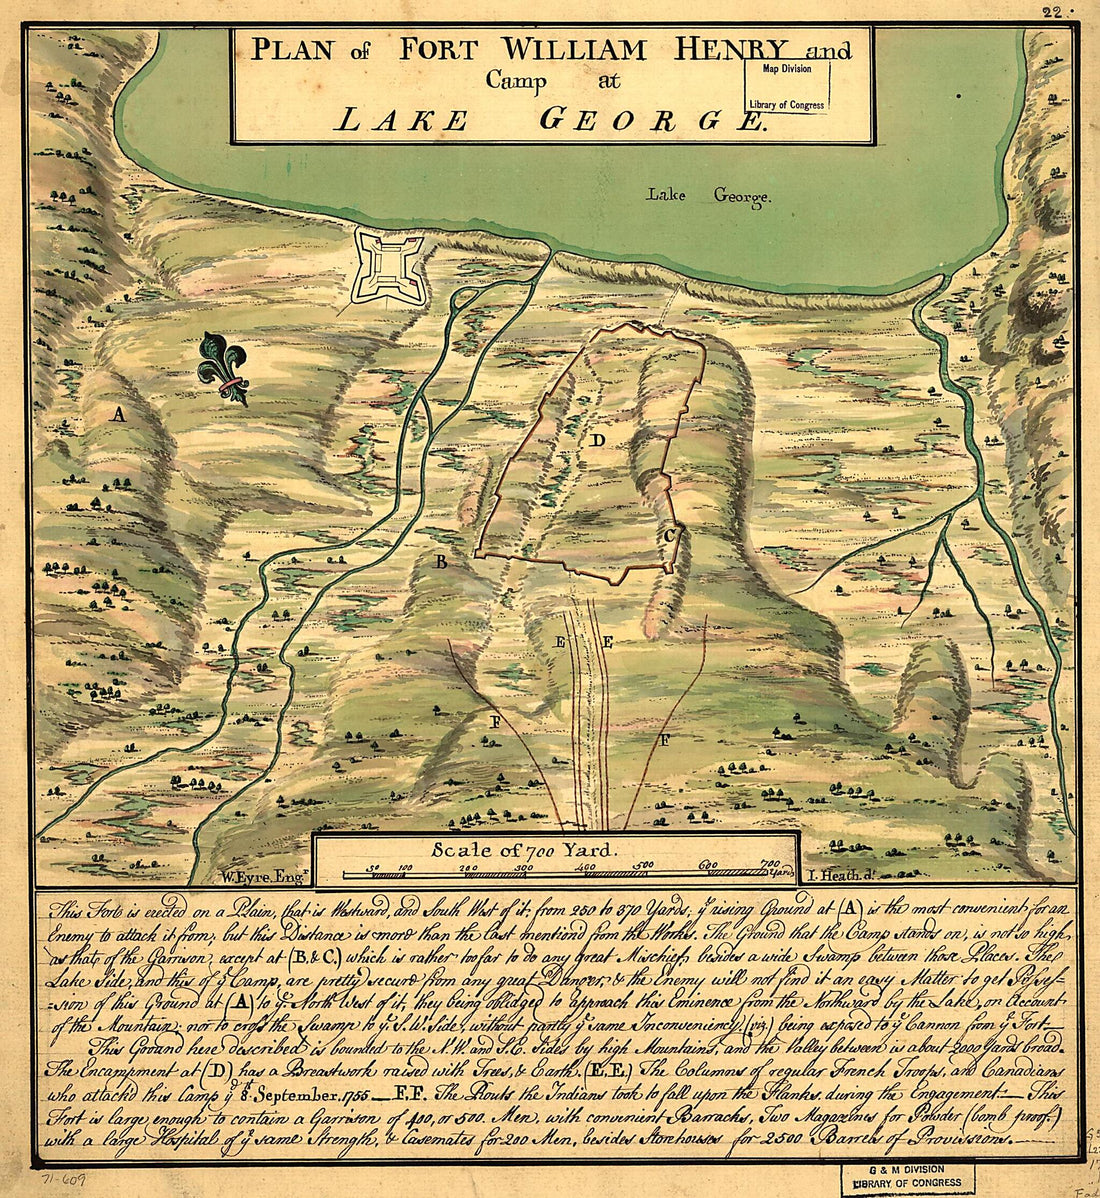 This old map of Plan of Fort William Henry and Camp at Lake George from 1755 was created by William Eyre, Joseph Heath in 1755